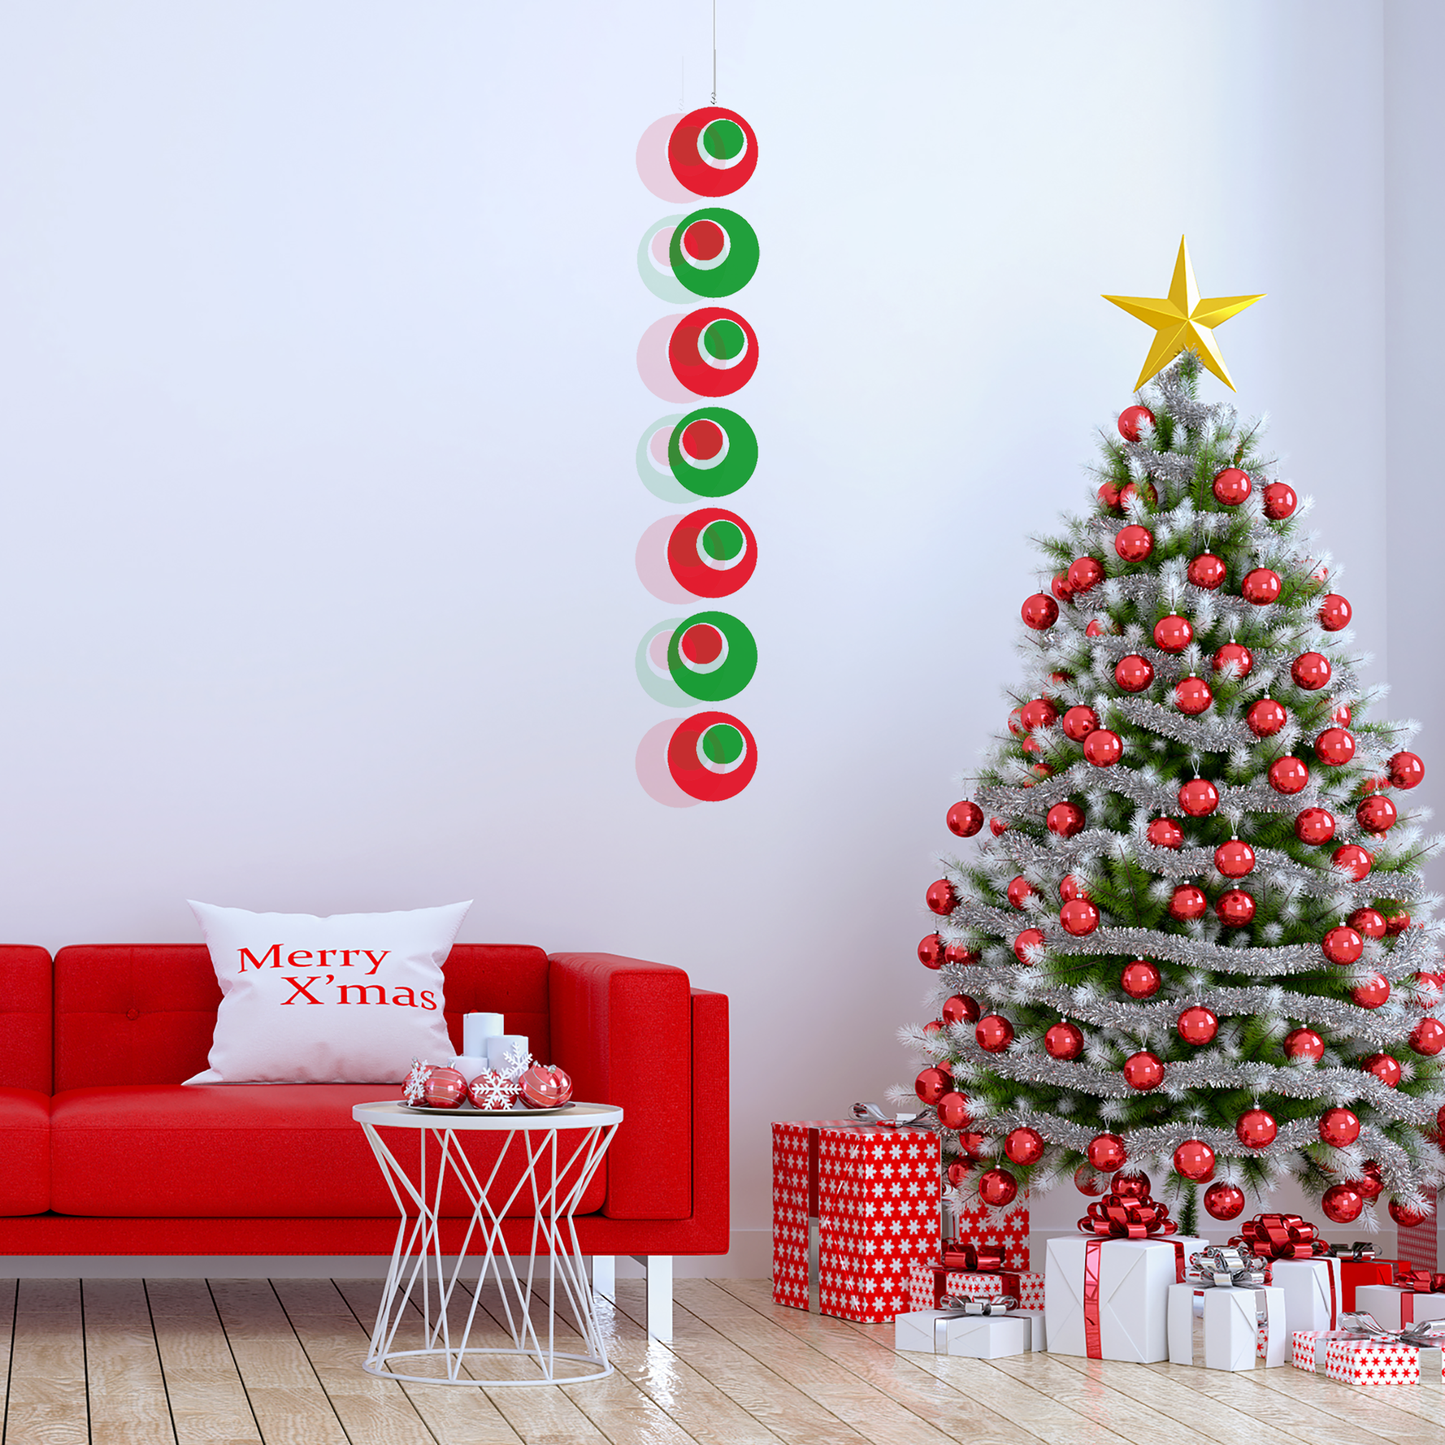 Christmas decorated living room with red and green hanging art mobile with lovely Christmas tree, red sofa, and presents - DIY KIt by AtomicMobiles.com